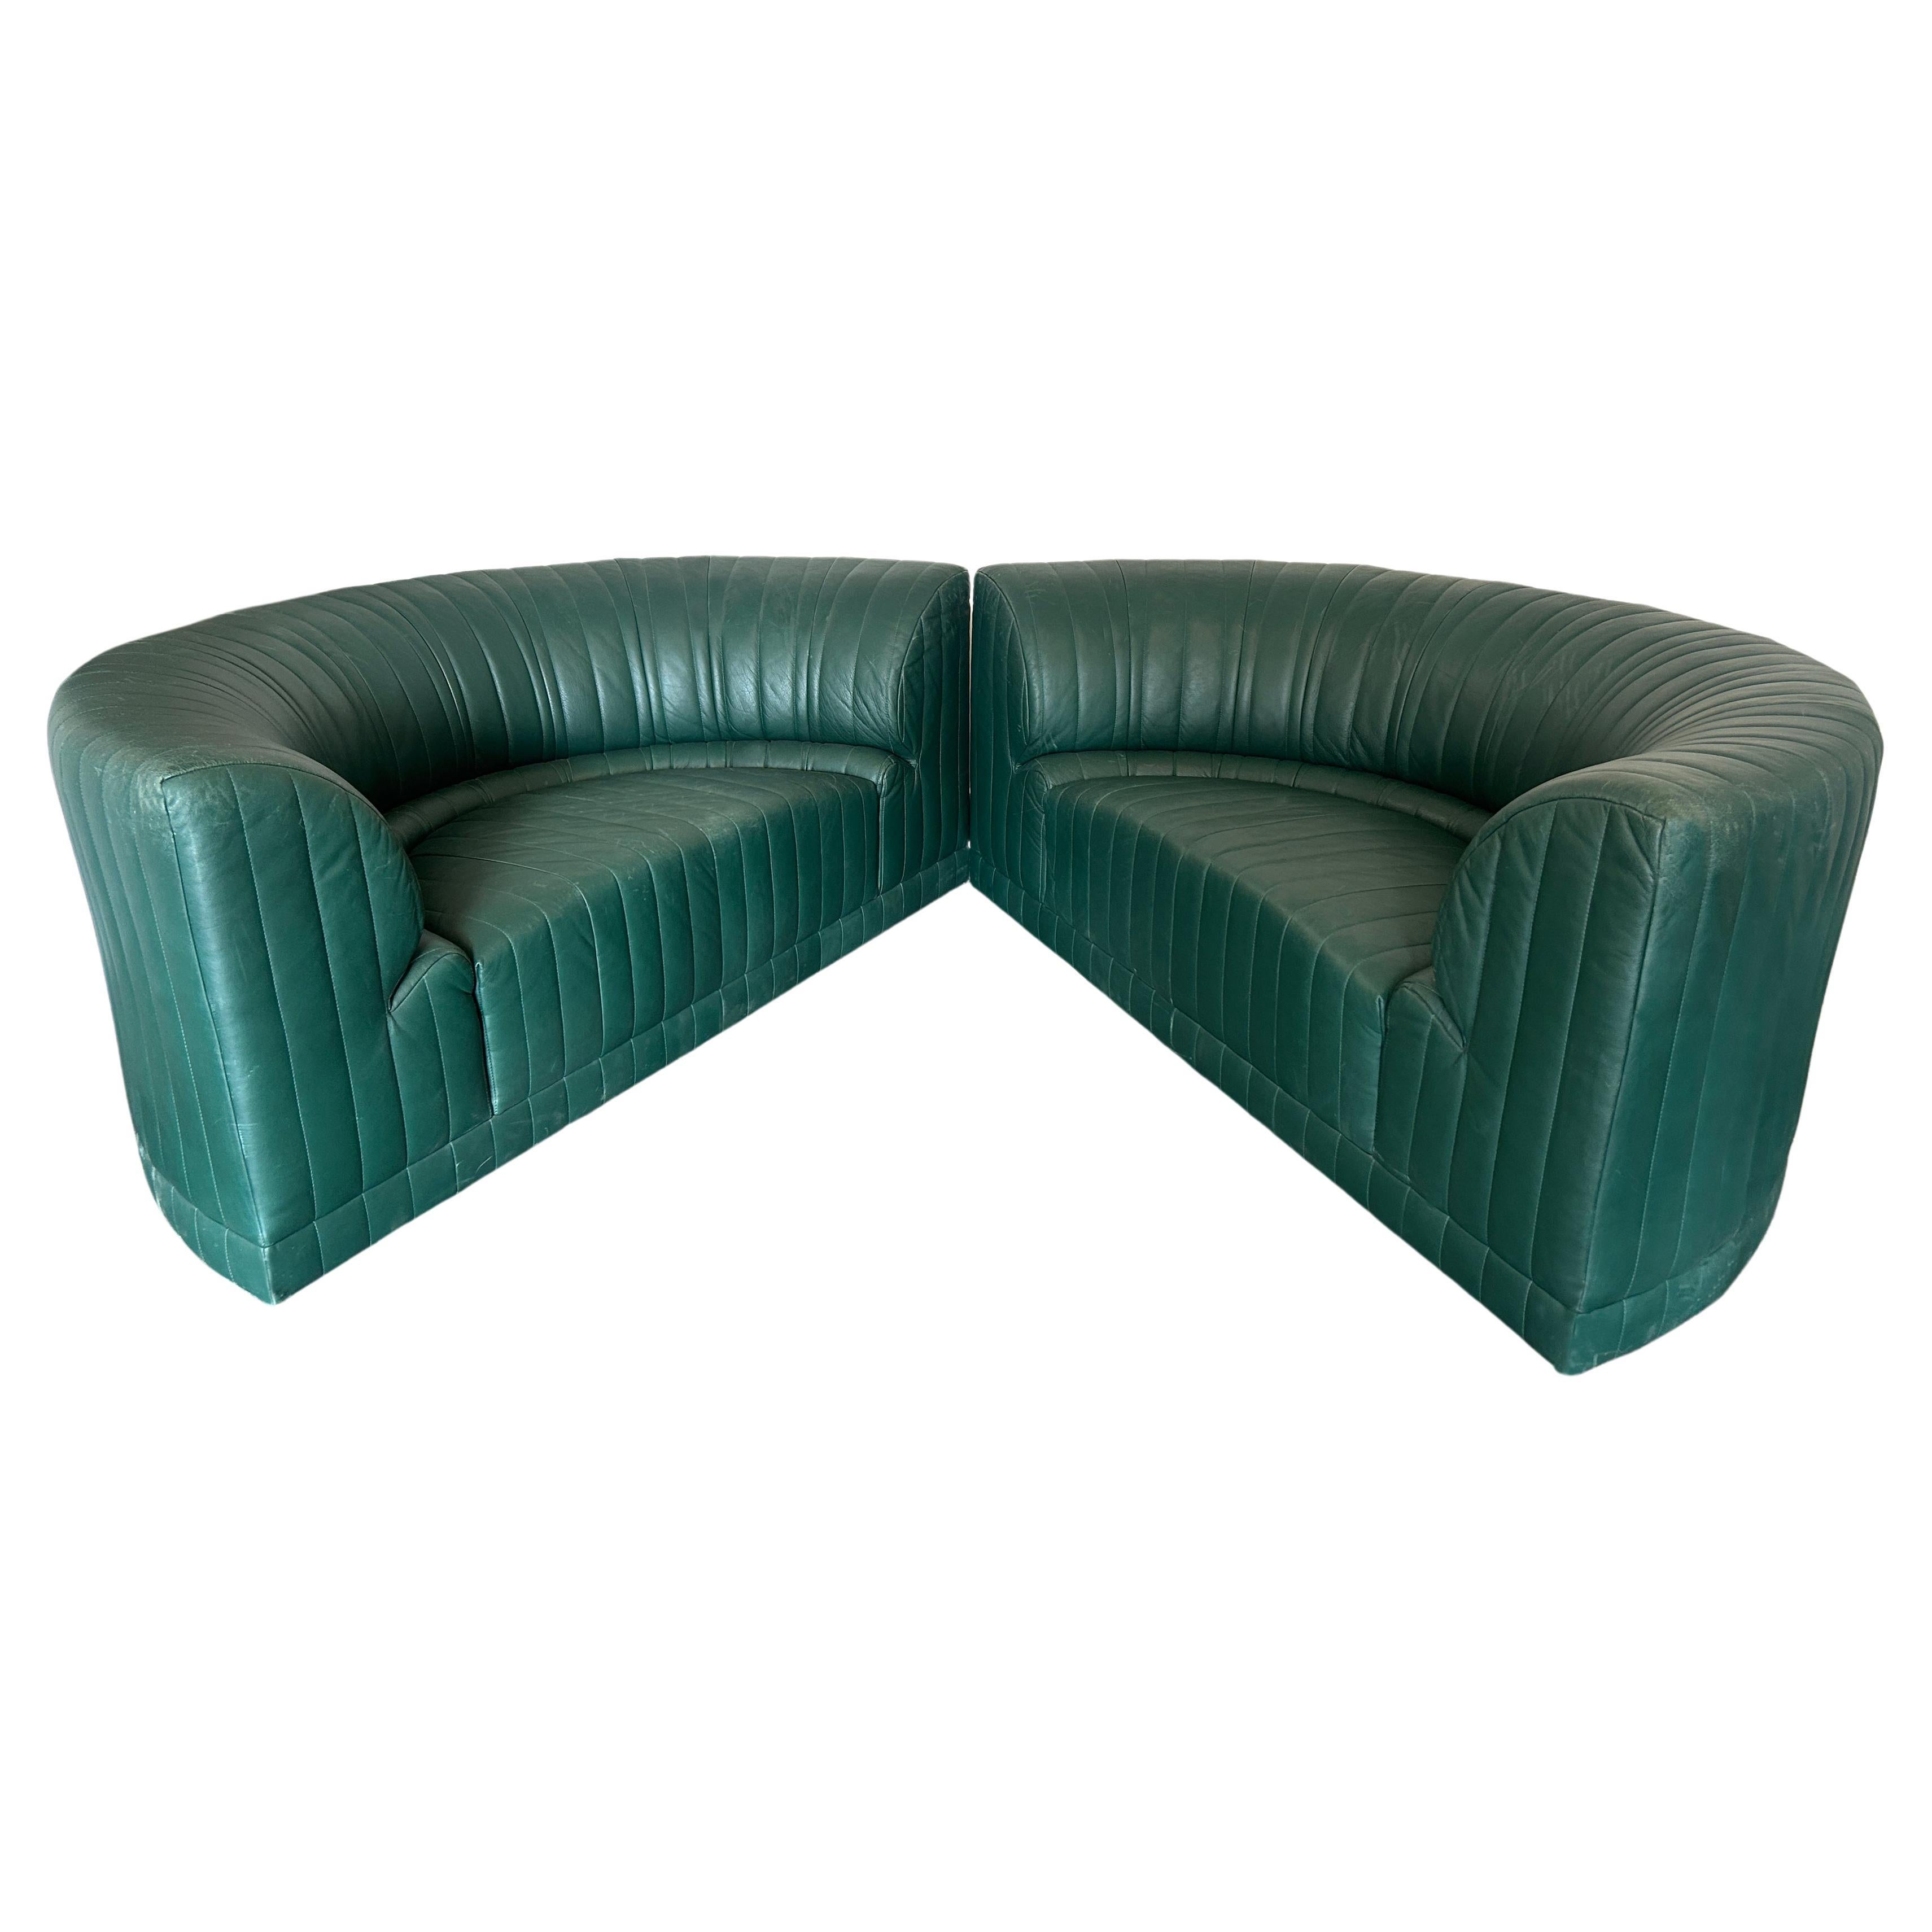 Pair of Post Modern Half Round Section of Roche Bobois Green Leather Sectional Sofas 1983. Like 2 Loveseats as far as scale. Soft Green leather Can be used as a sofa or side chair or a full circle fun sofa and hop in the middle to relax. Great Post